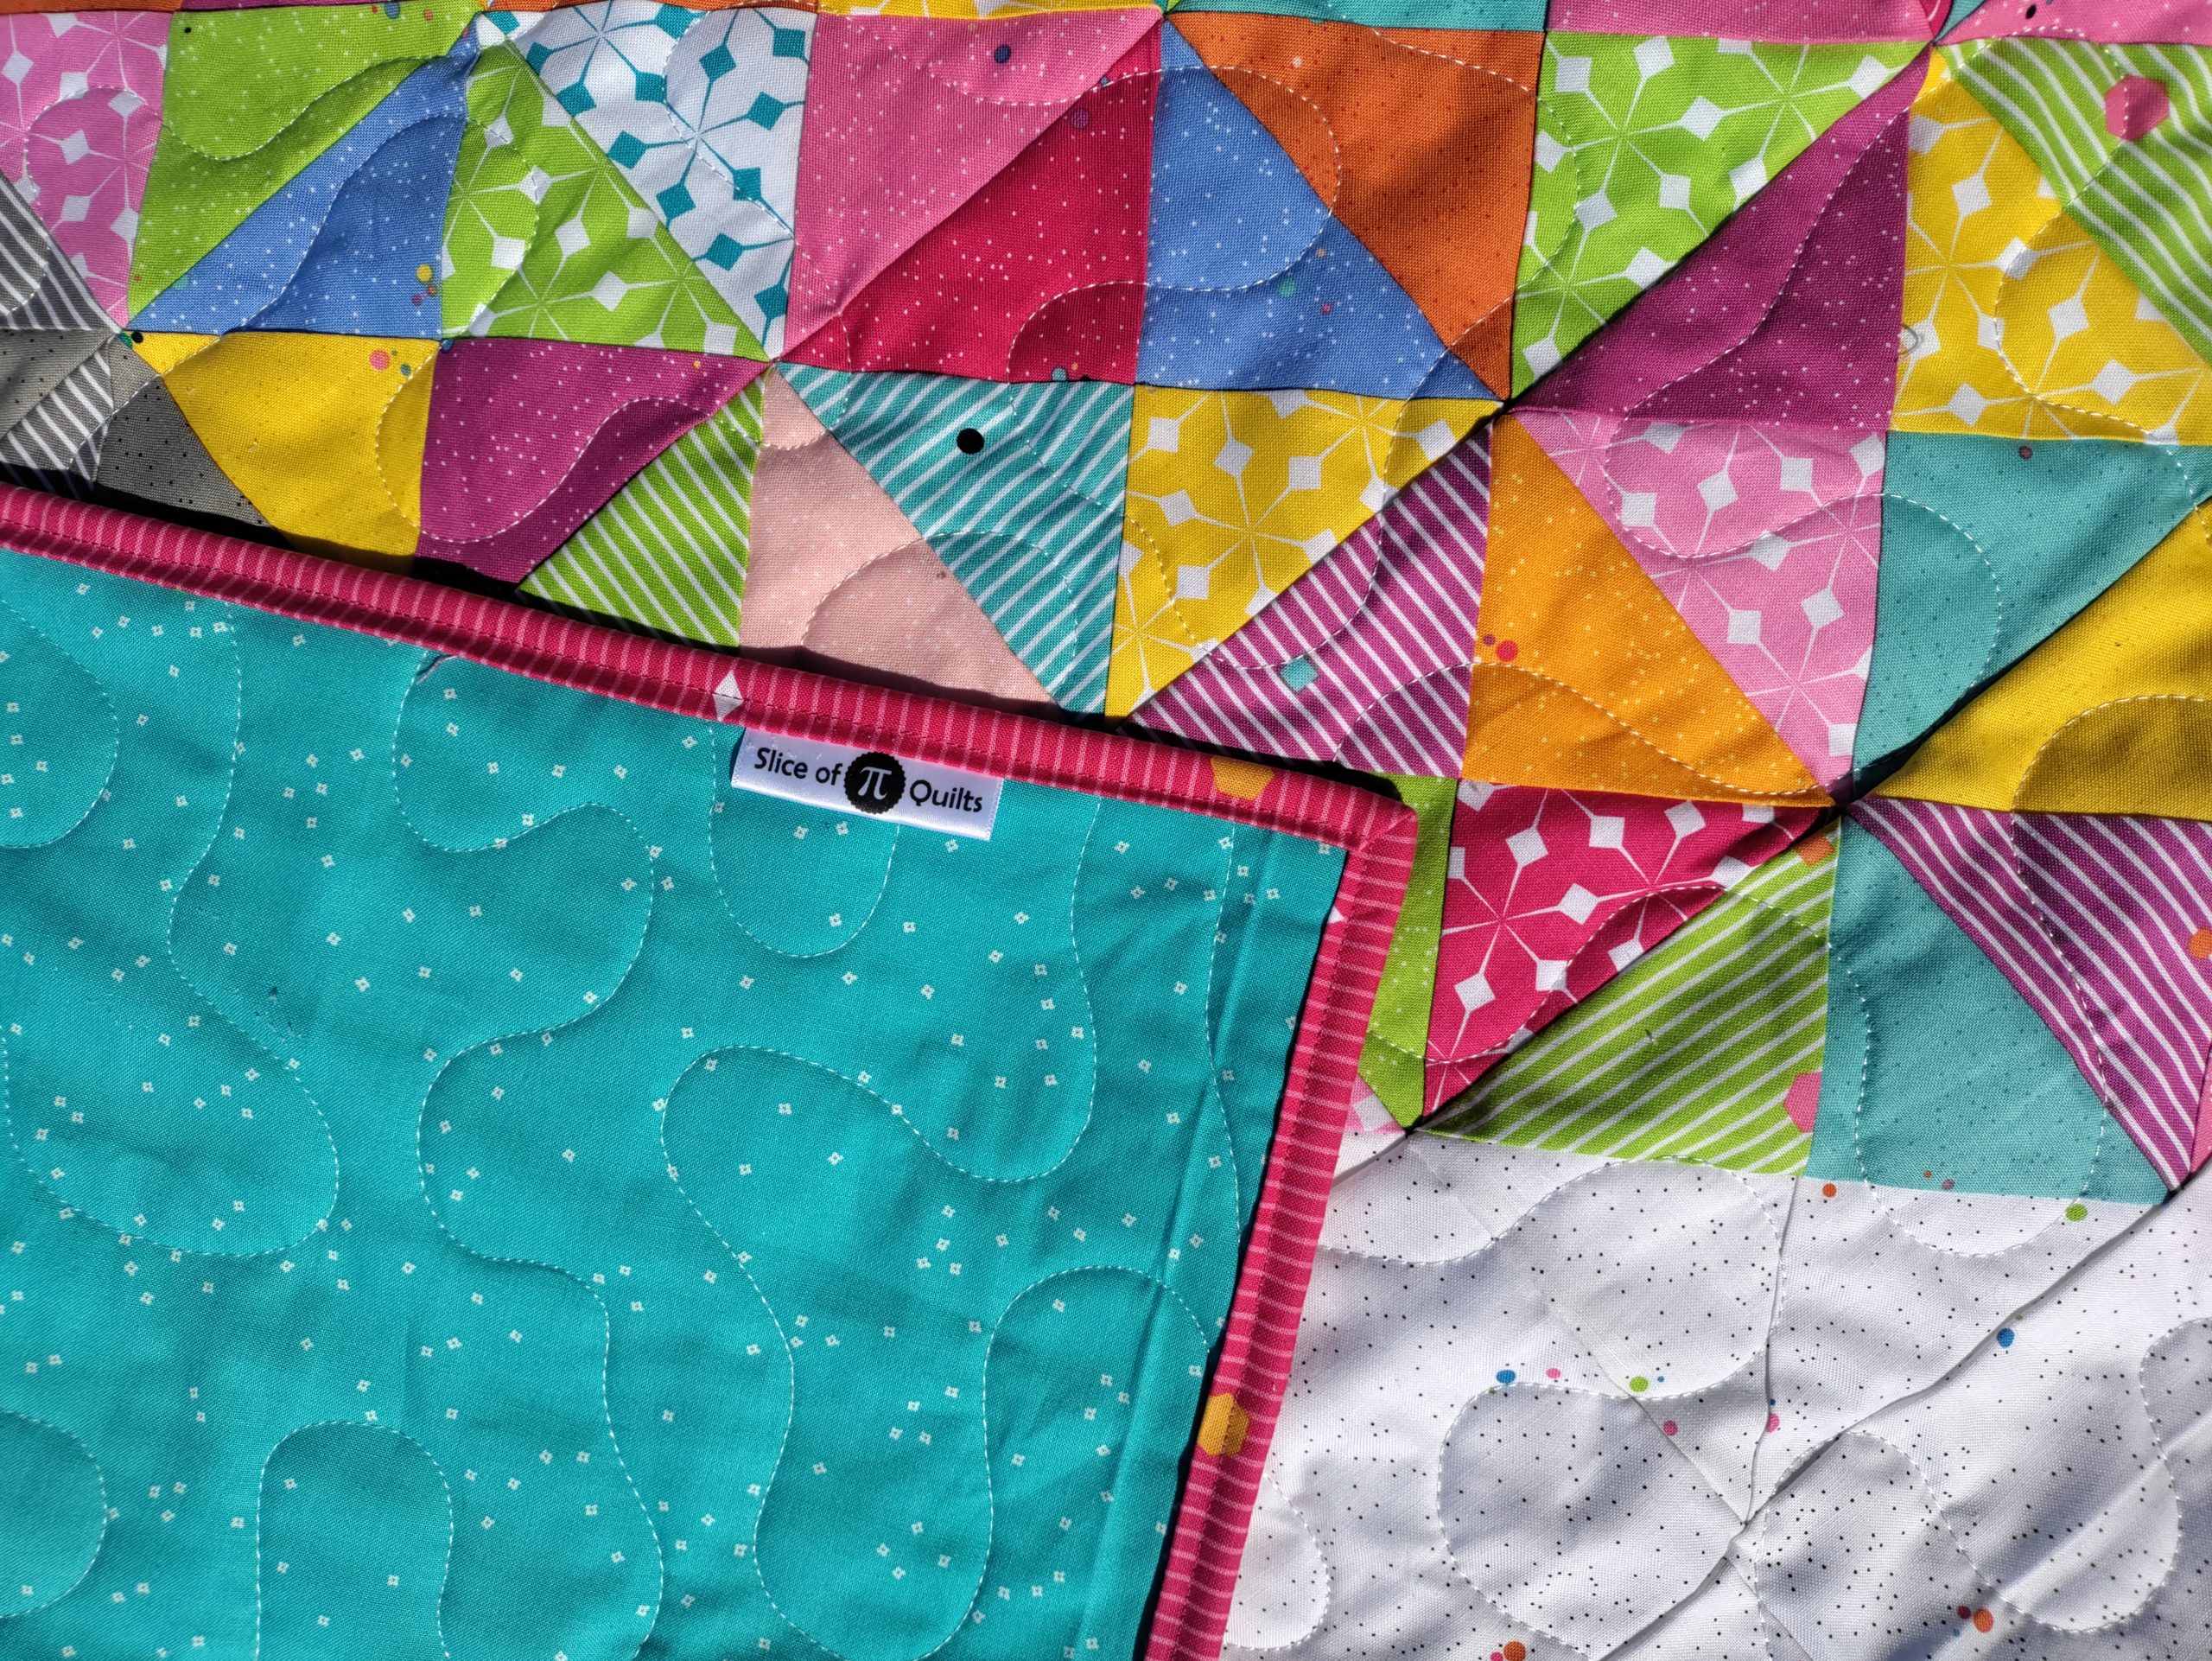 A satin quilt label sewn into the binding of the Flutterfly butterfly quilt. Aqua colored fabric is on the back of the quilt, and pink striped fabric is on the binding.